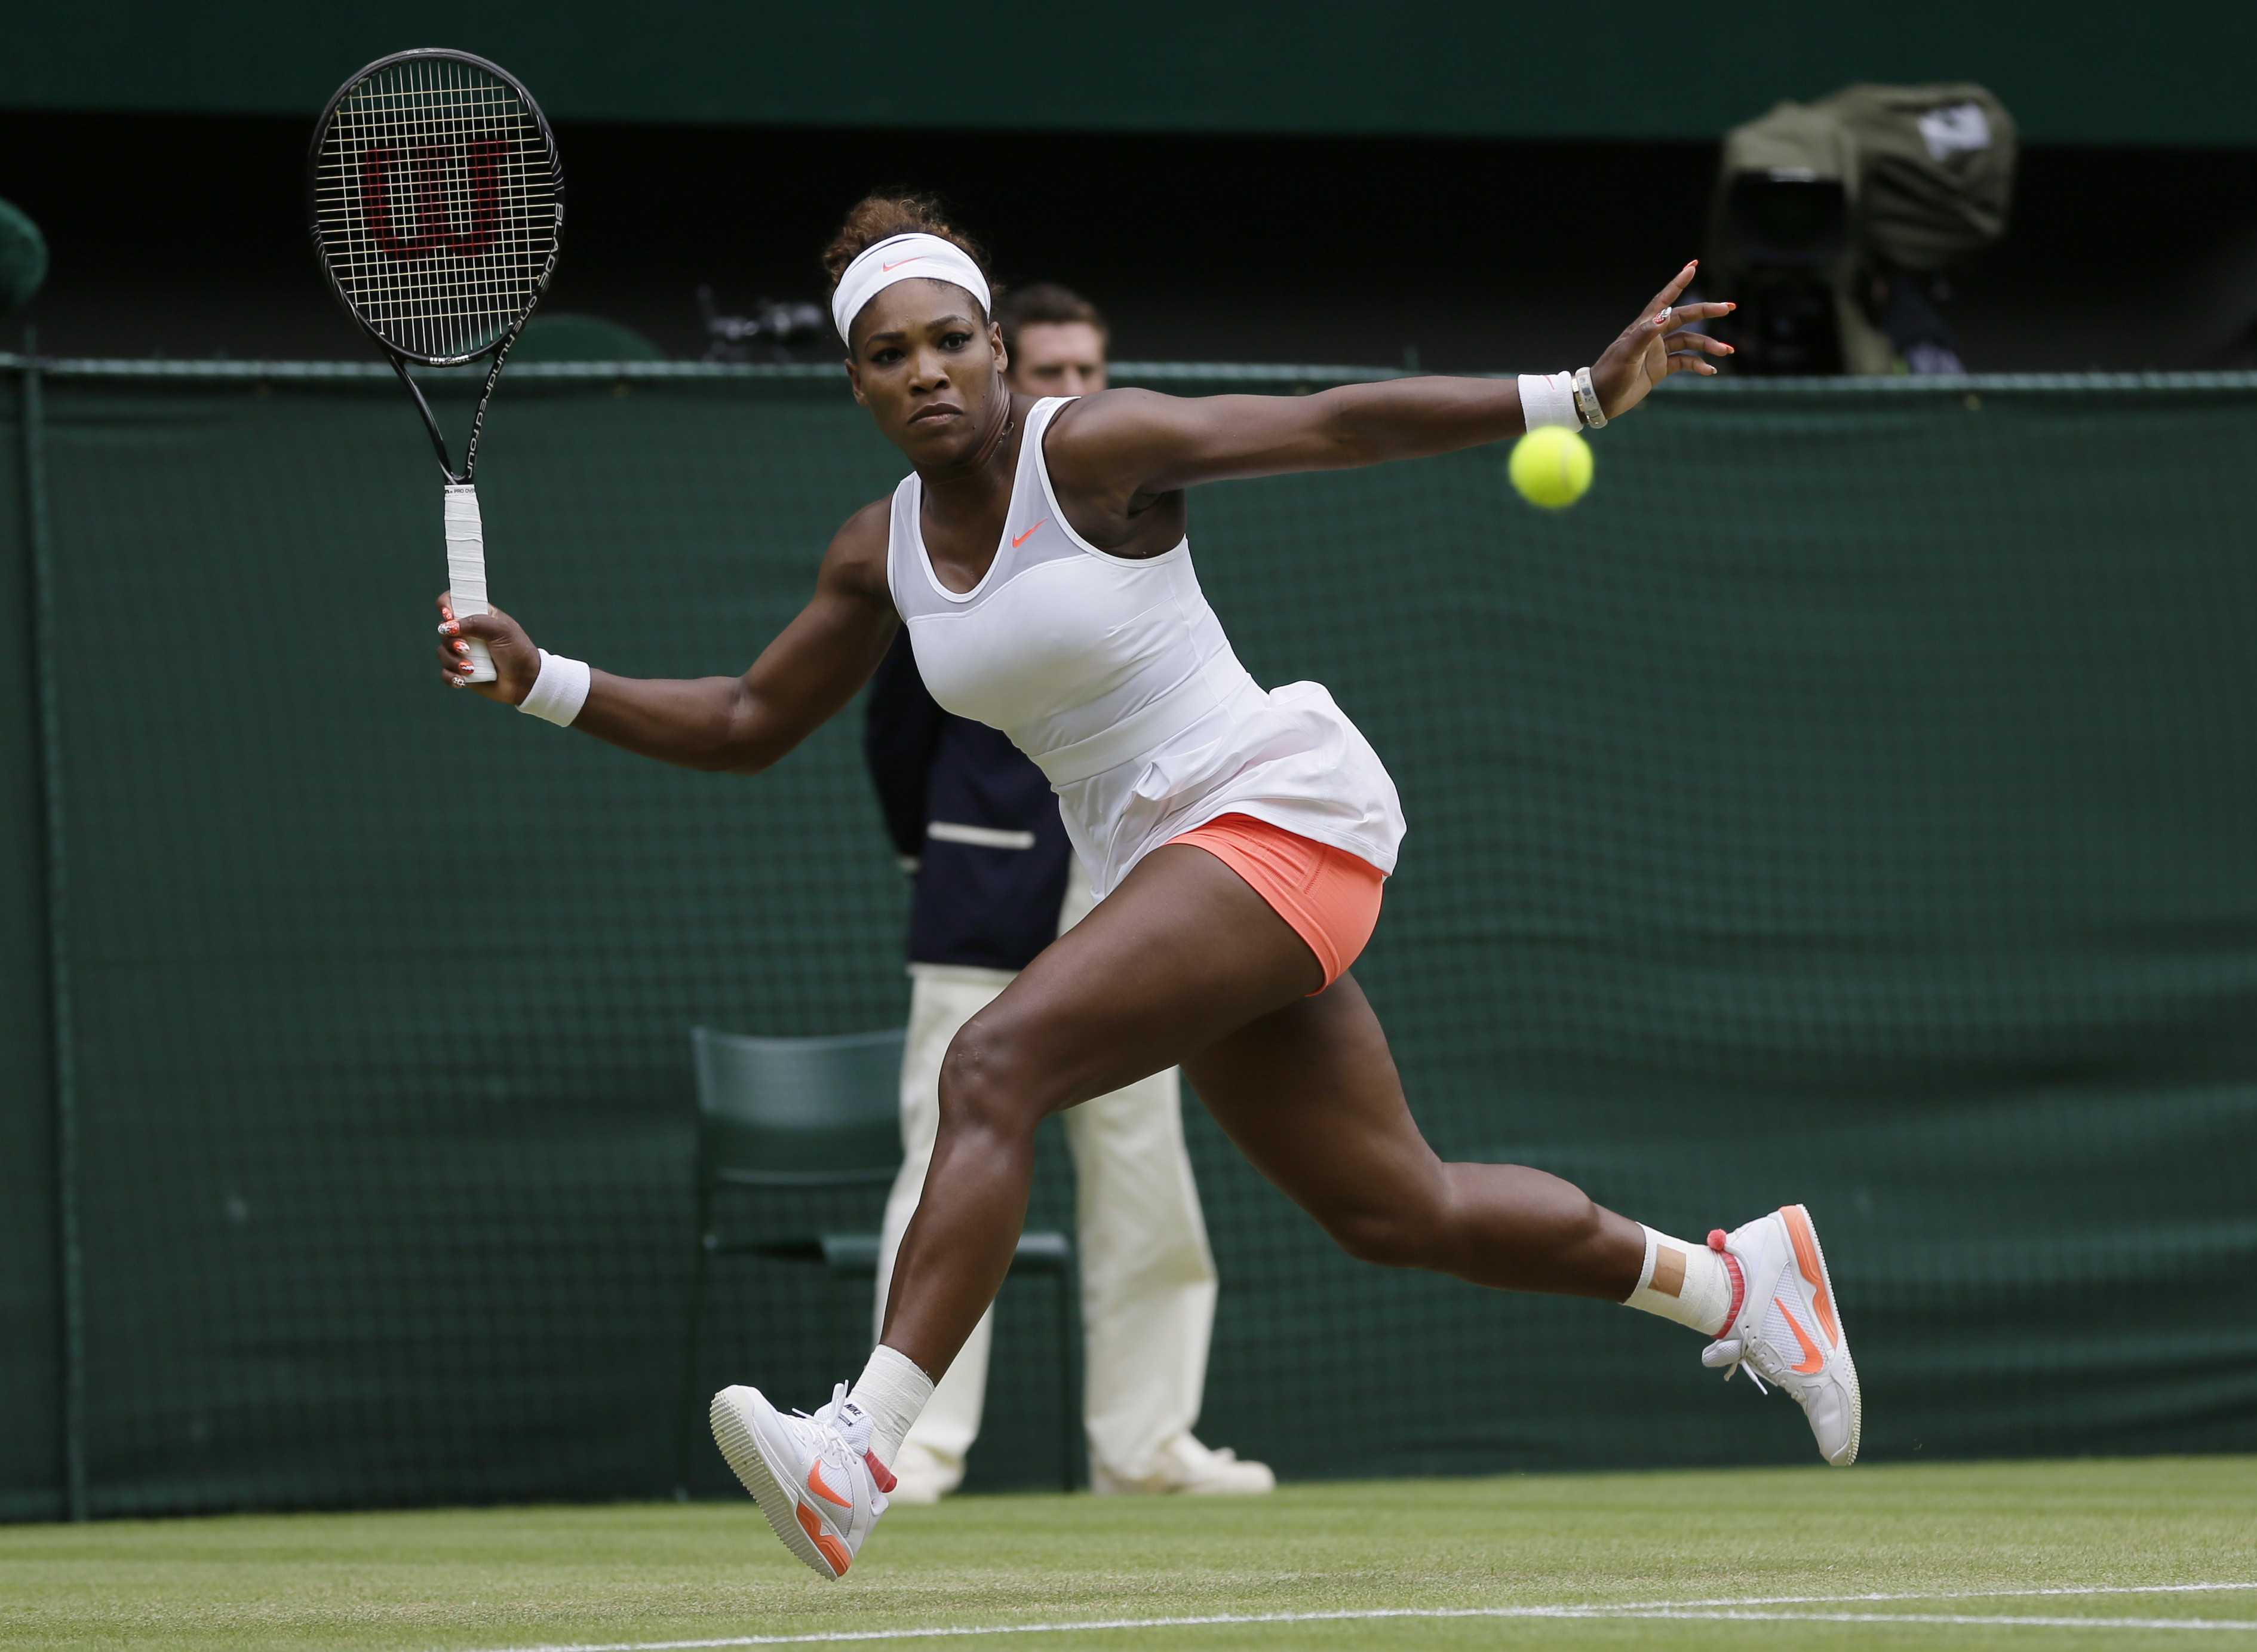 Williams loses to Lisicki in Wimbledon 4th round - The Blade3779 x 2766